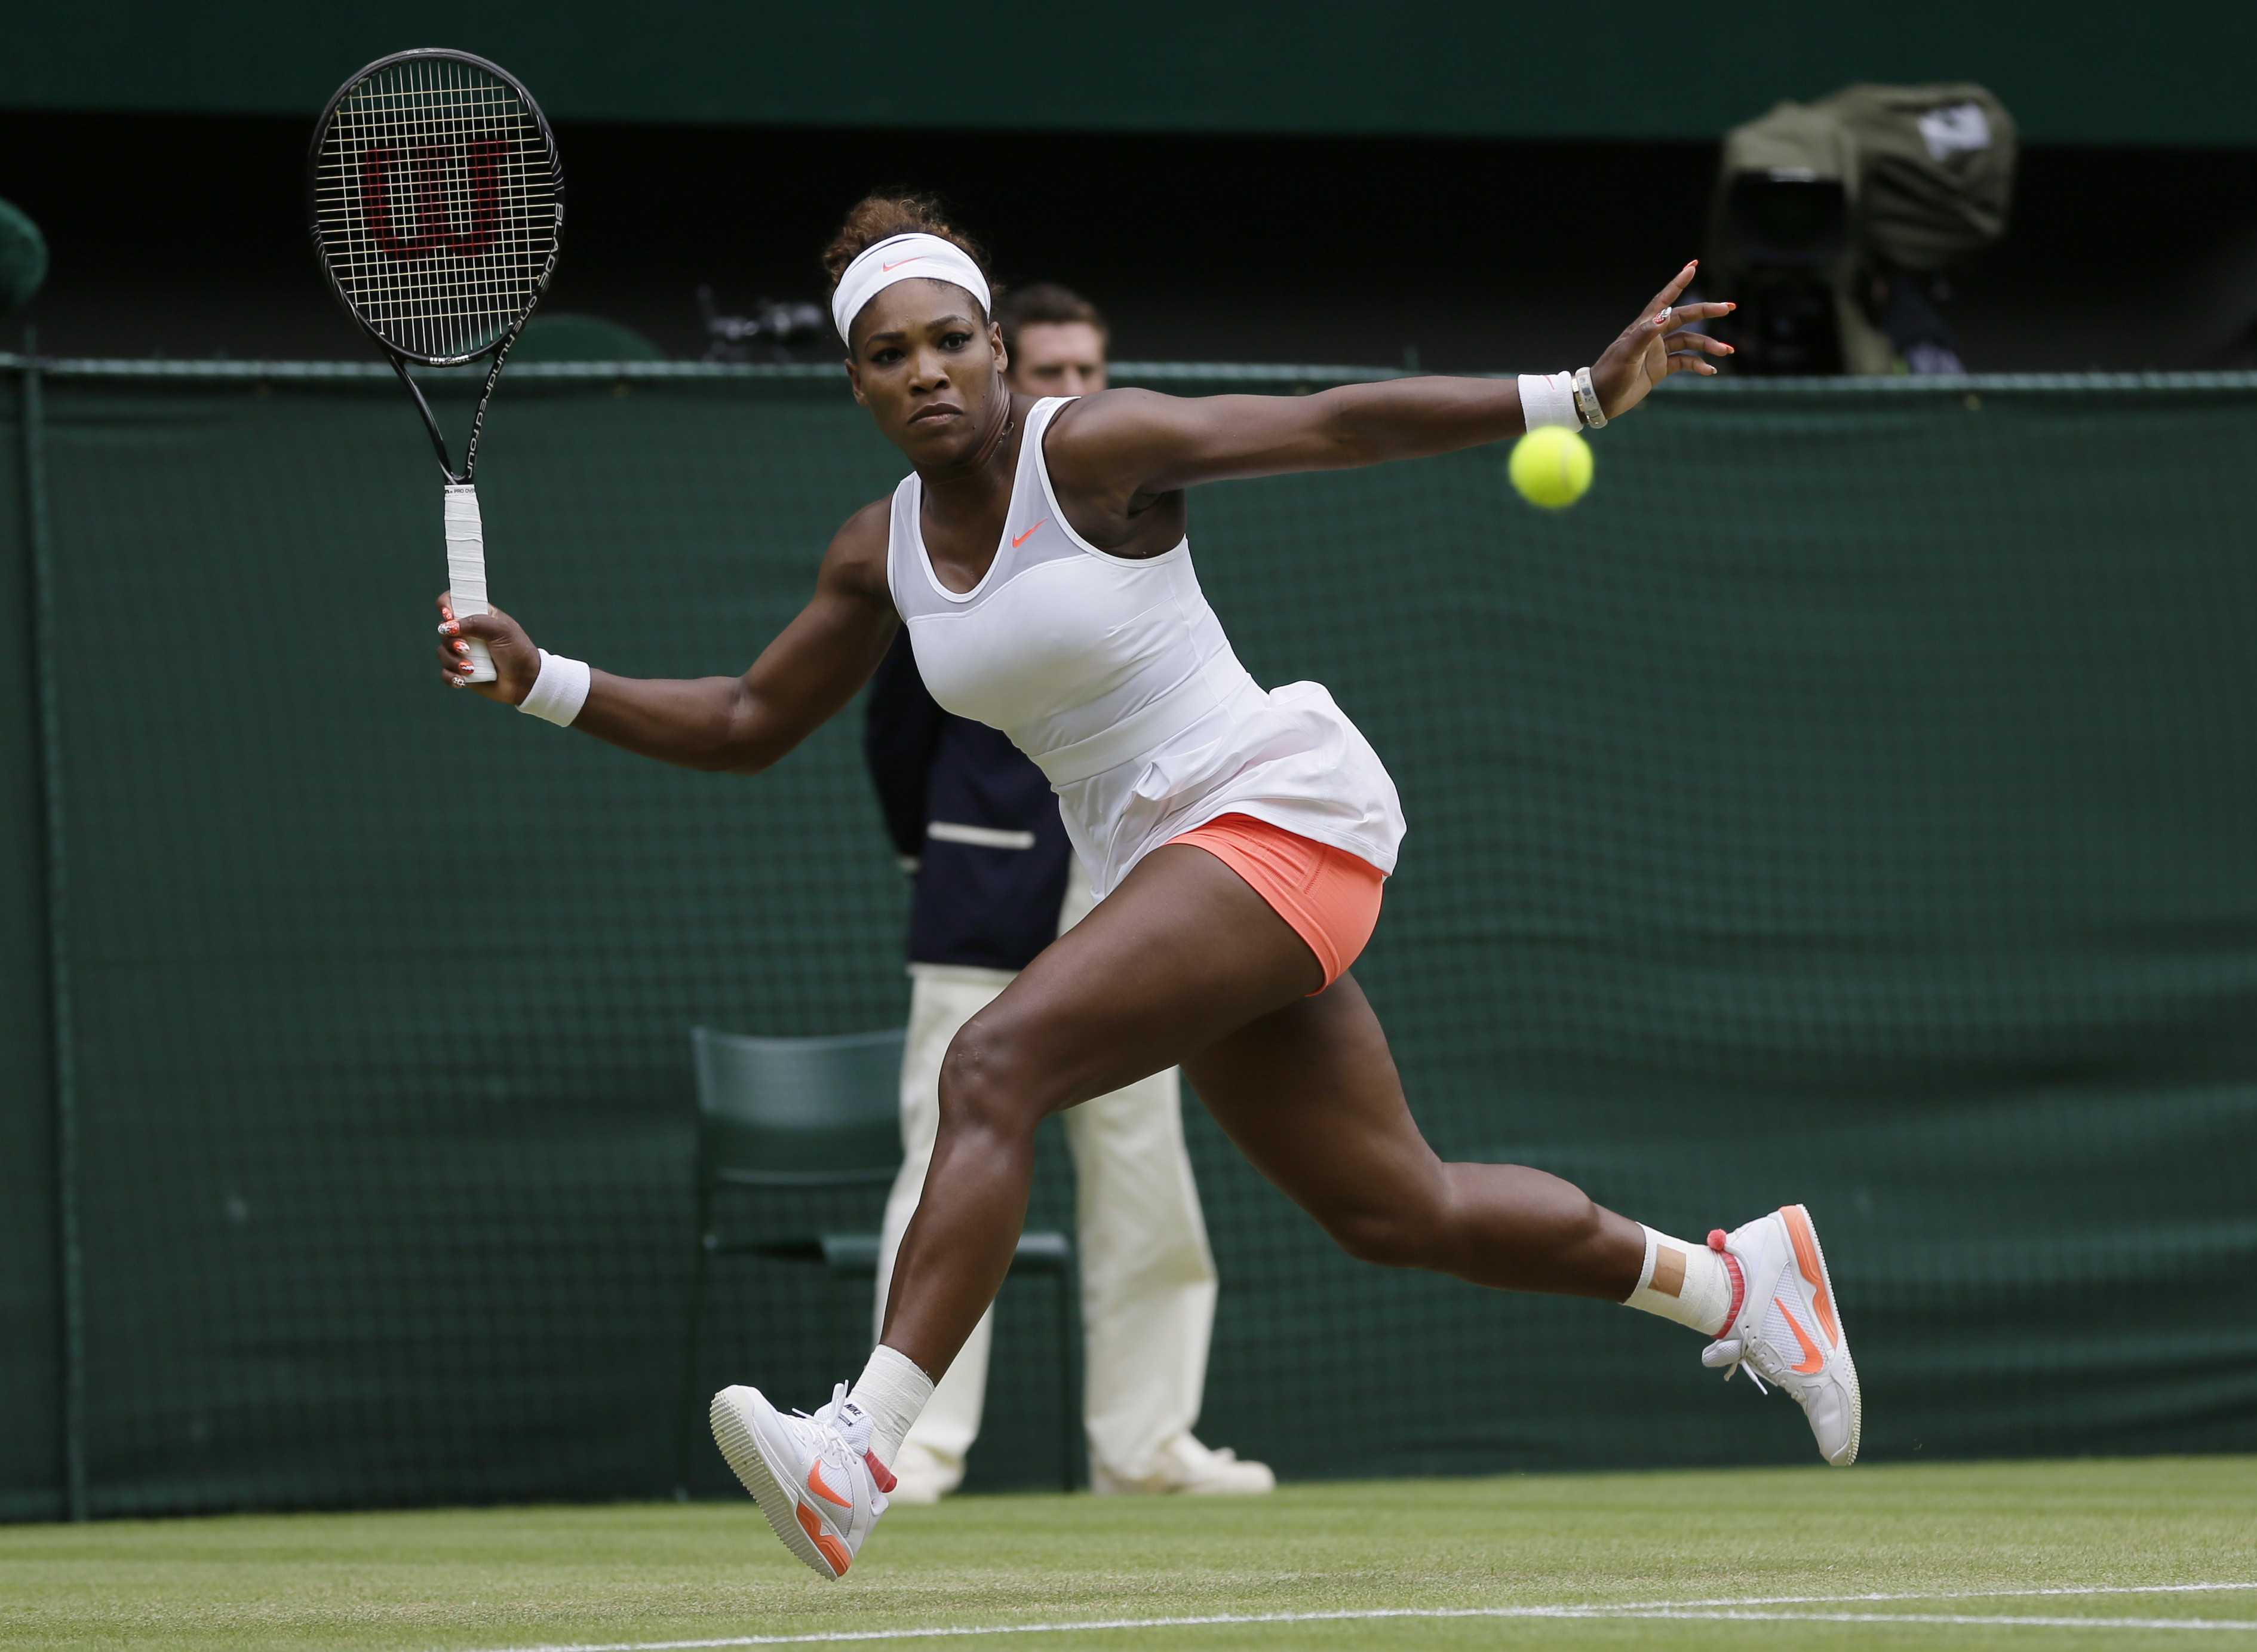 Williams loses to Lisicki in Wimbledon 4th round - The Blade3779 x 2766